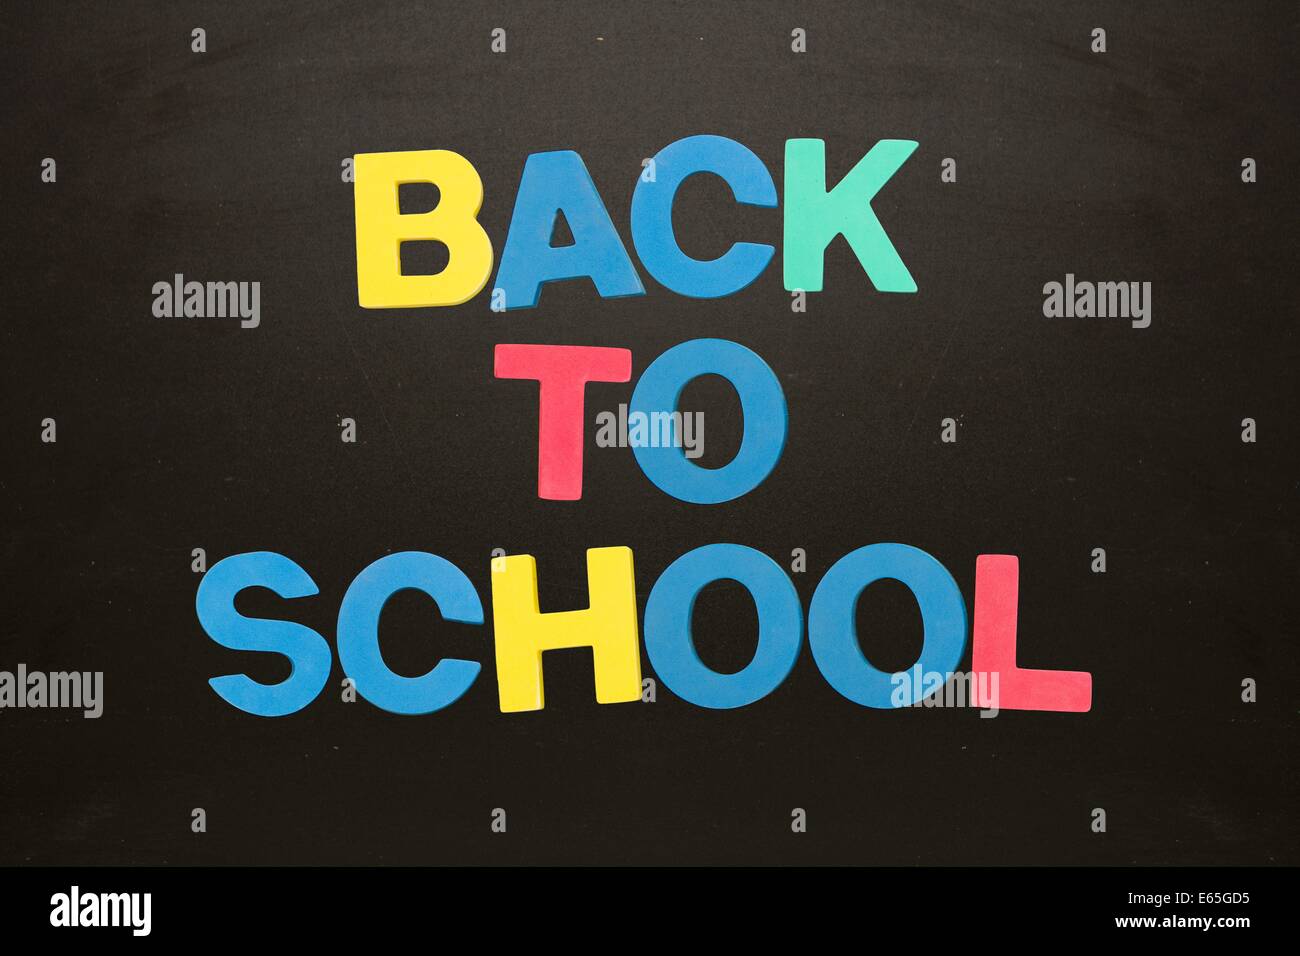 Colourful back to school message Stock Photo